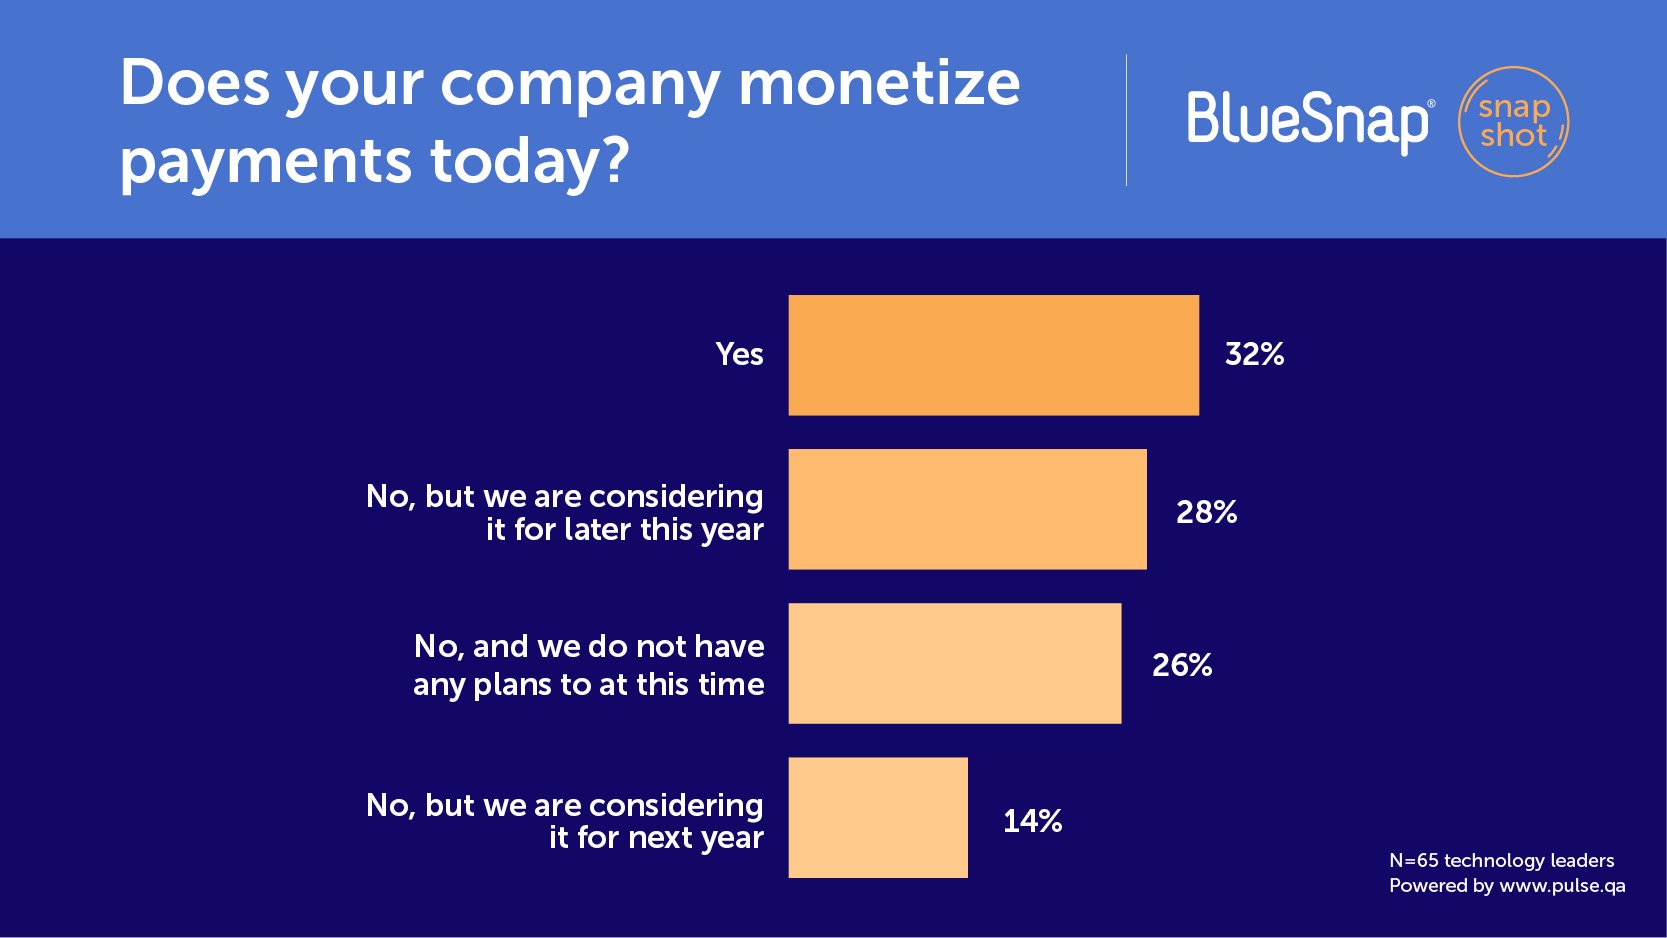 Does your company monetize payment today?